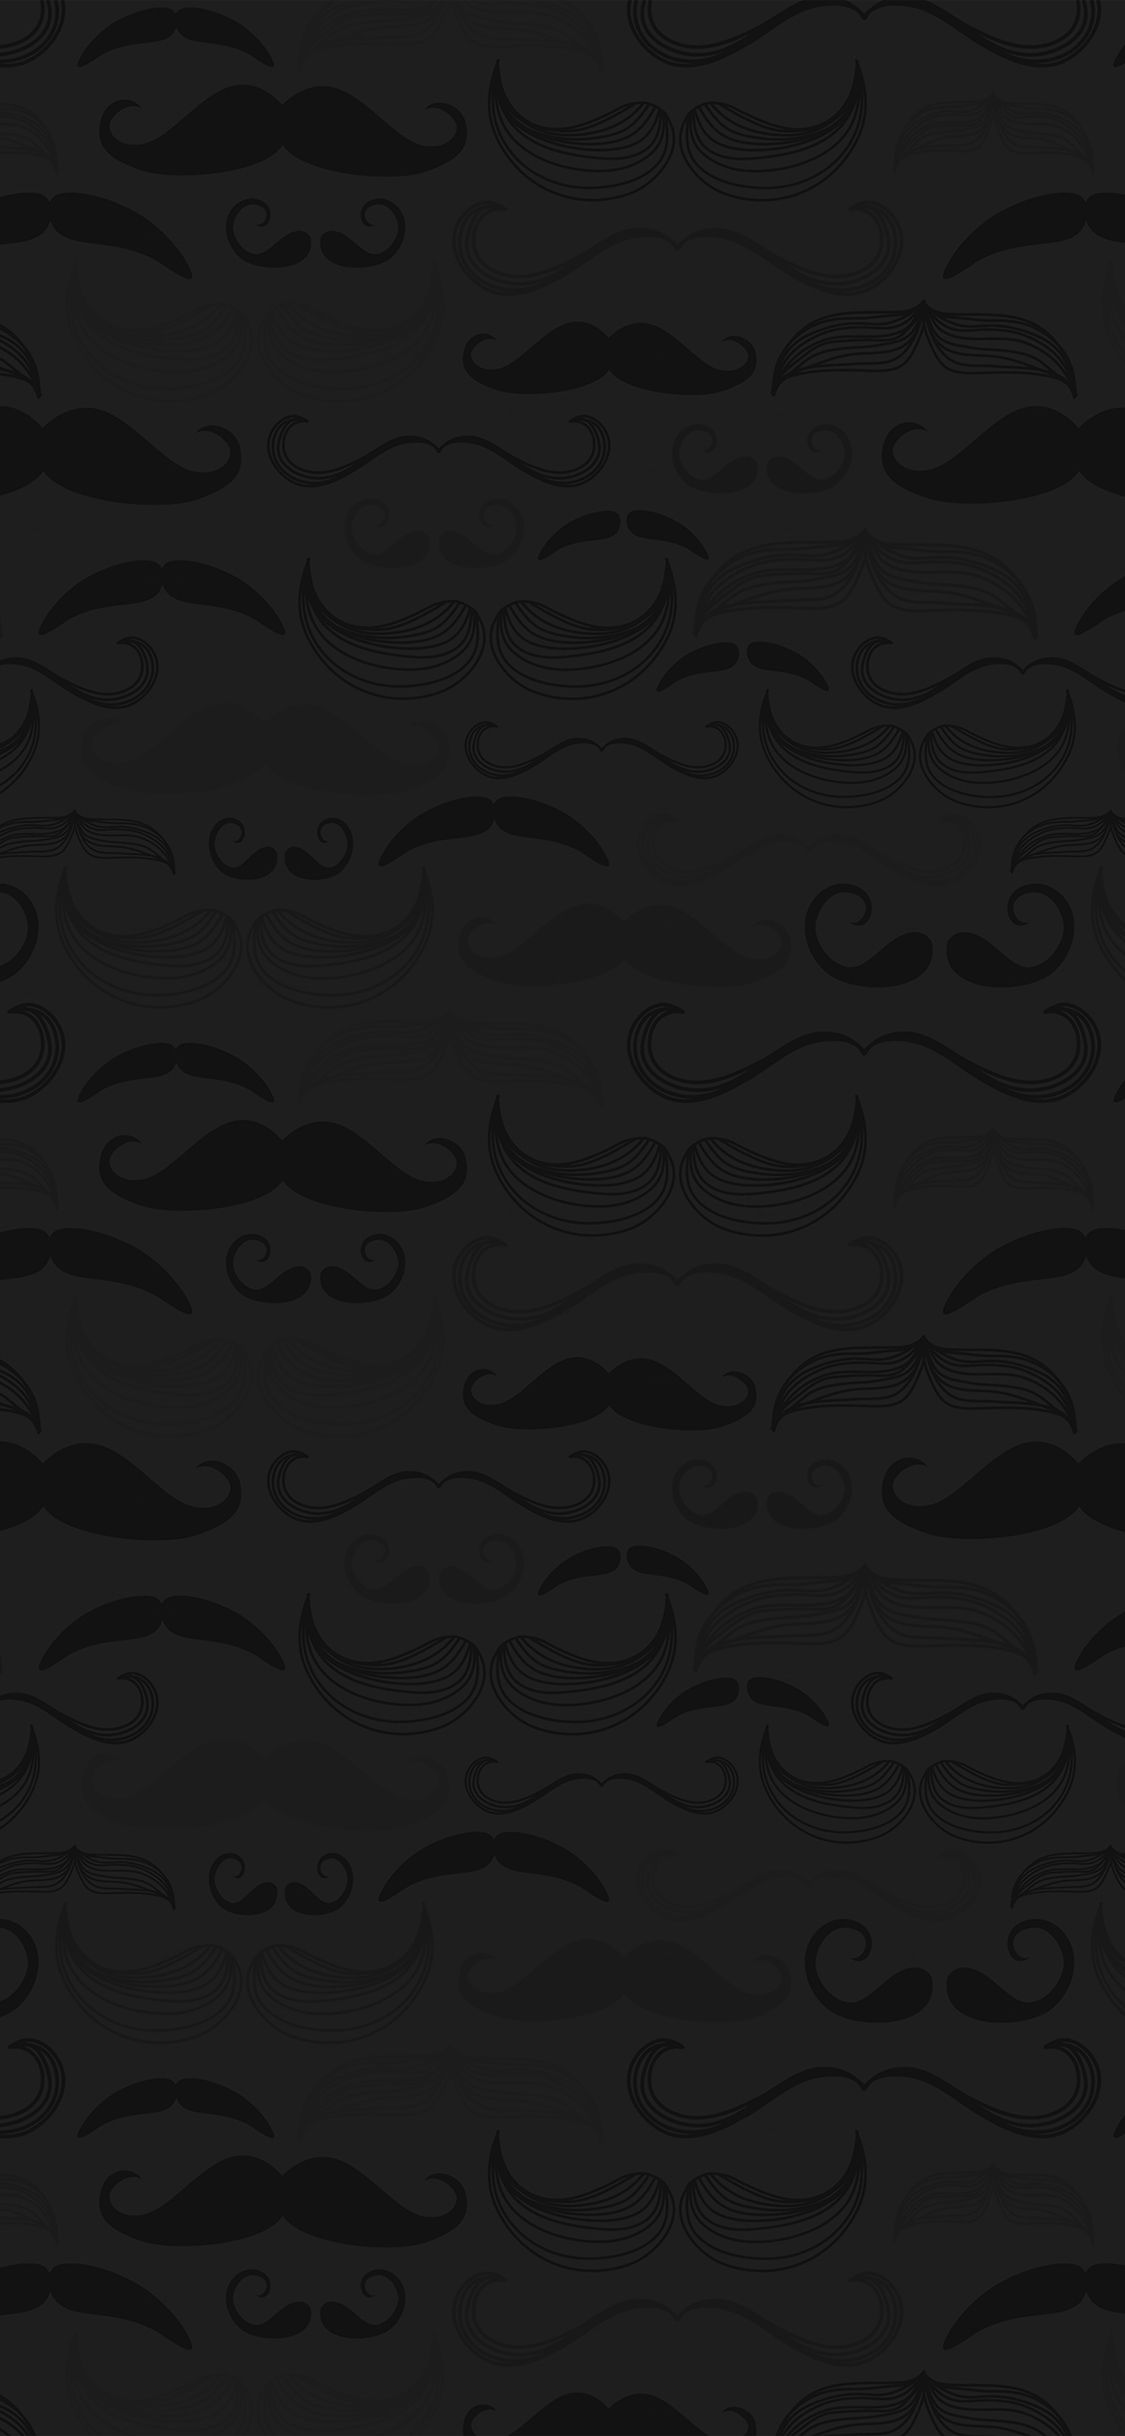 Hipster moustache cute patterns iPhone X Wallpaper Free Download